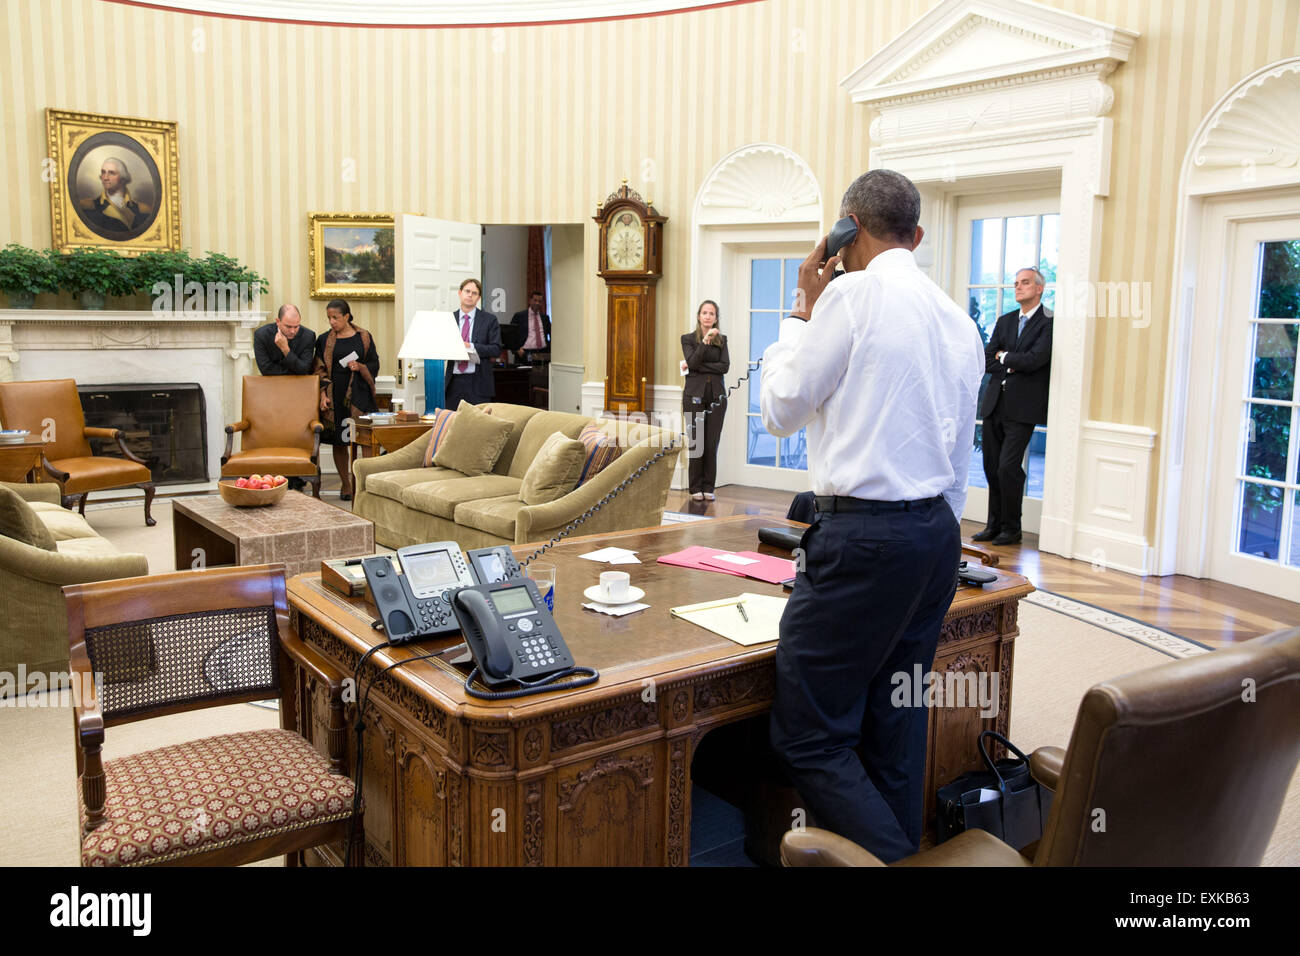 Washington, DC, USA. 14th July, 2015. U.S. President Barack Obama talks on the phone with Secretary of State John Kerry regarding the Iran nuclear agreement in the Oval Office of the White House July 13, 2015 in Washington, DC. Attending from left: Ben Rhodes, Deputy National Security Advisor for Strategic Communications, National Security Advisor Susan E. Rice, Jeffrey Prescott, Senior Director for Iran, Iraq, Syria, and the Gulf States, Avril Haines, Deputy National Security Advisor Counterterrorism and Chief of Staff Denis McDonough. Stock Photo